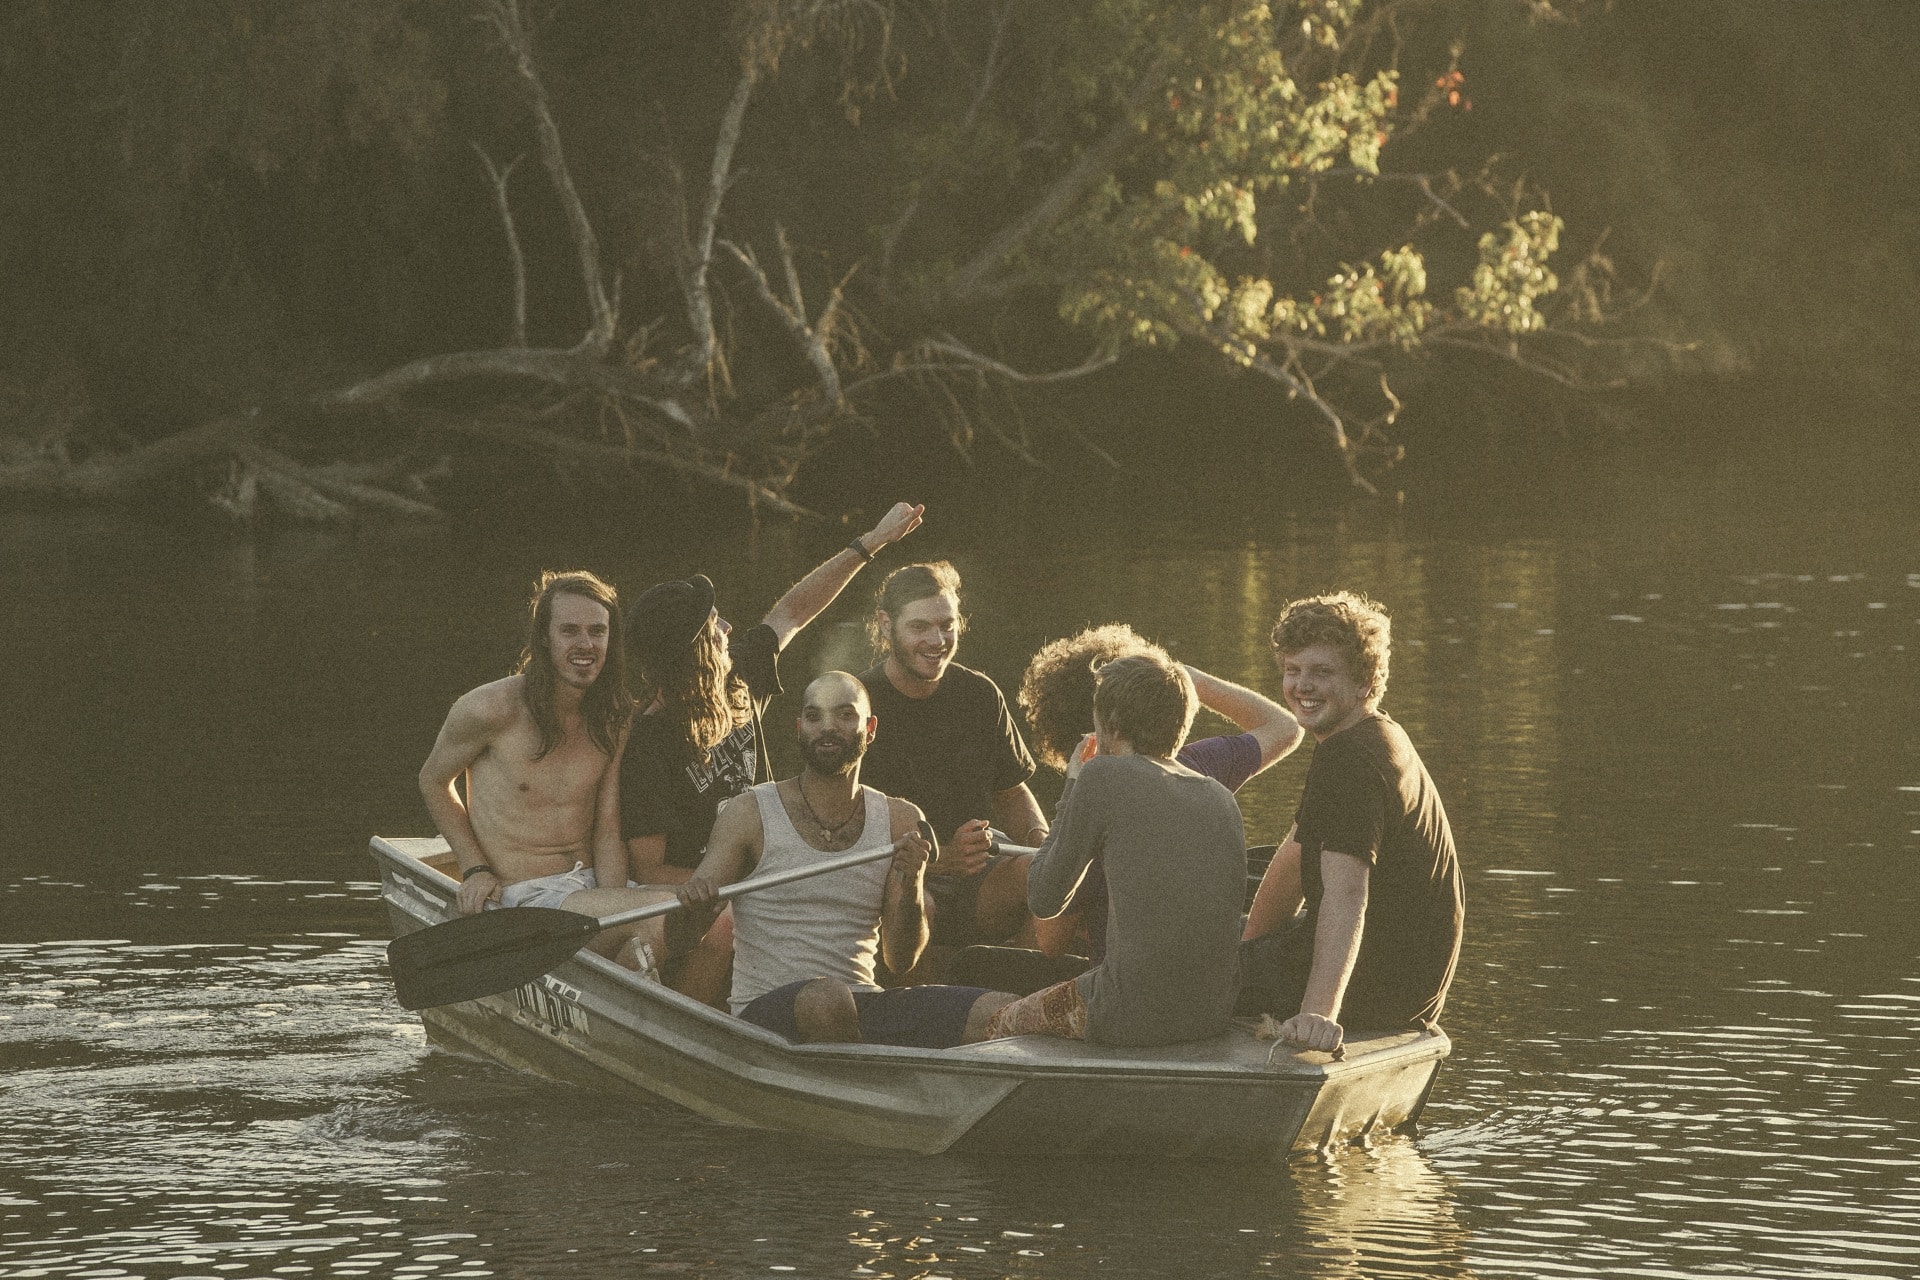 The members of Koi Child sitting in a dinghy on a river and laughing.